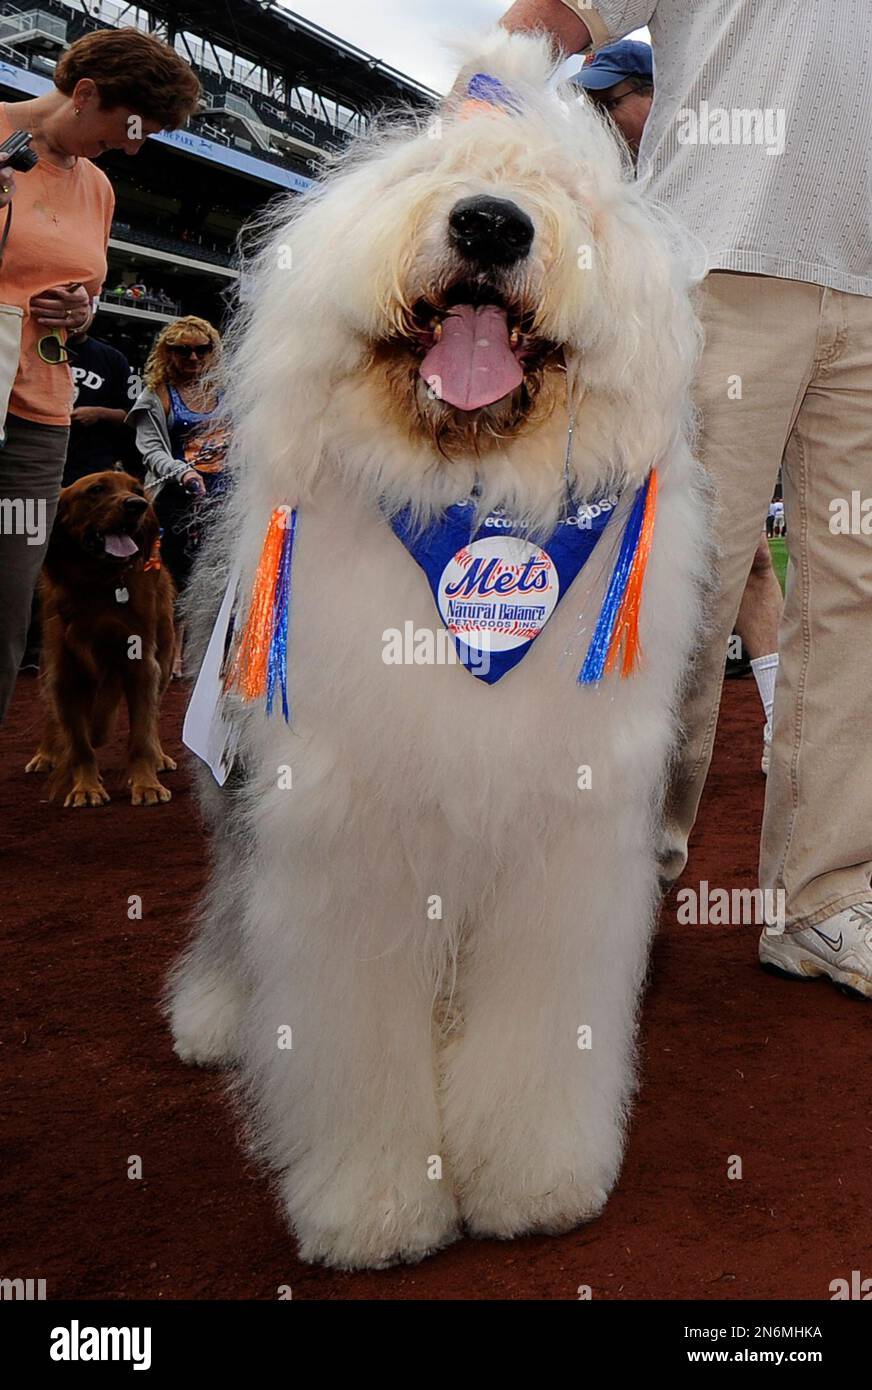 A dog walks around the field during Bark in the Park day at Citi Field  before Game 1 of a doubleheader baseball game between the New York Mets and  the Miami Marlins